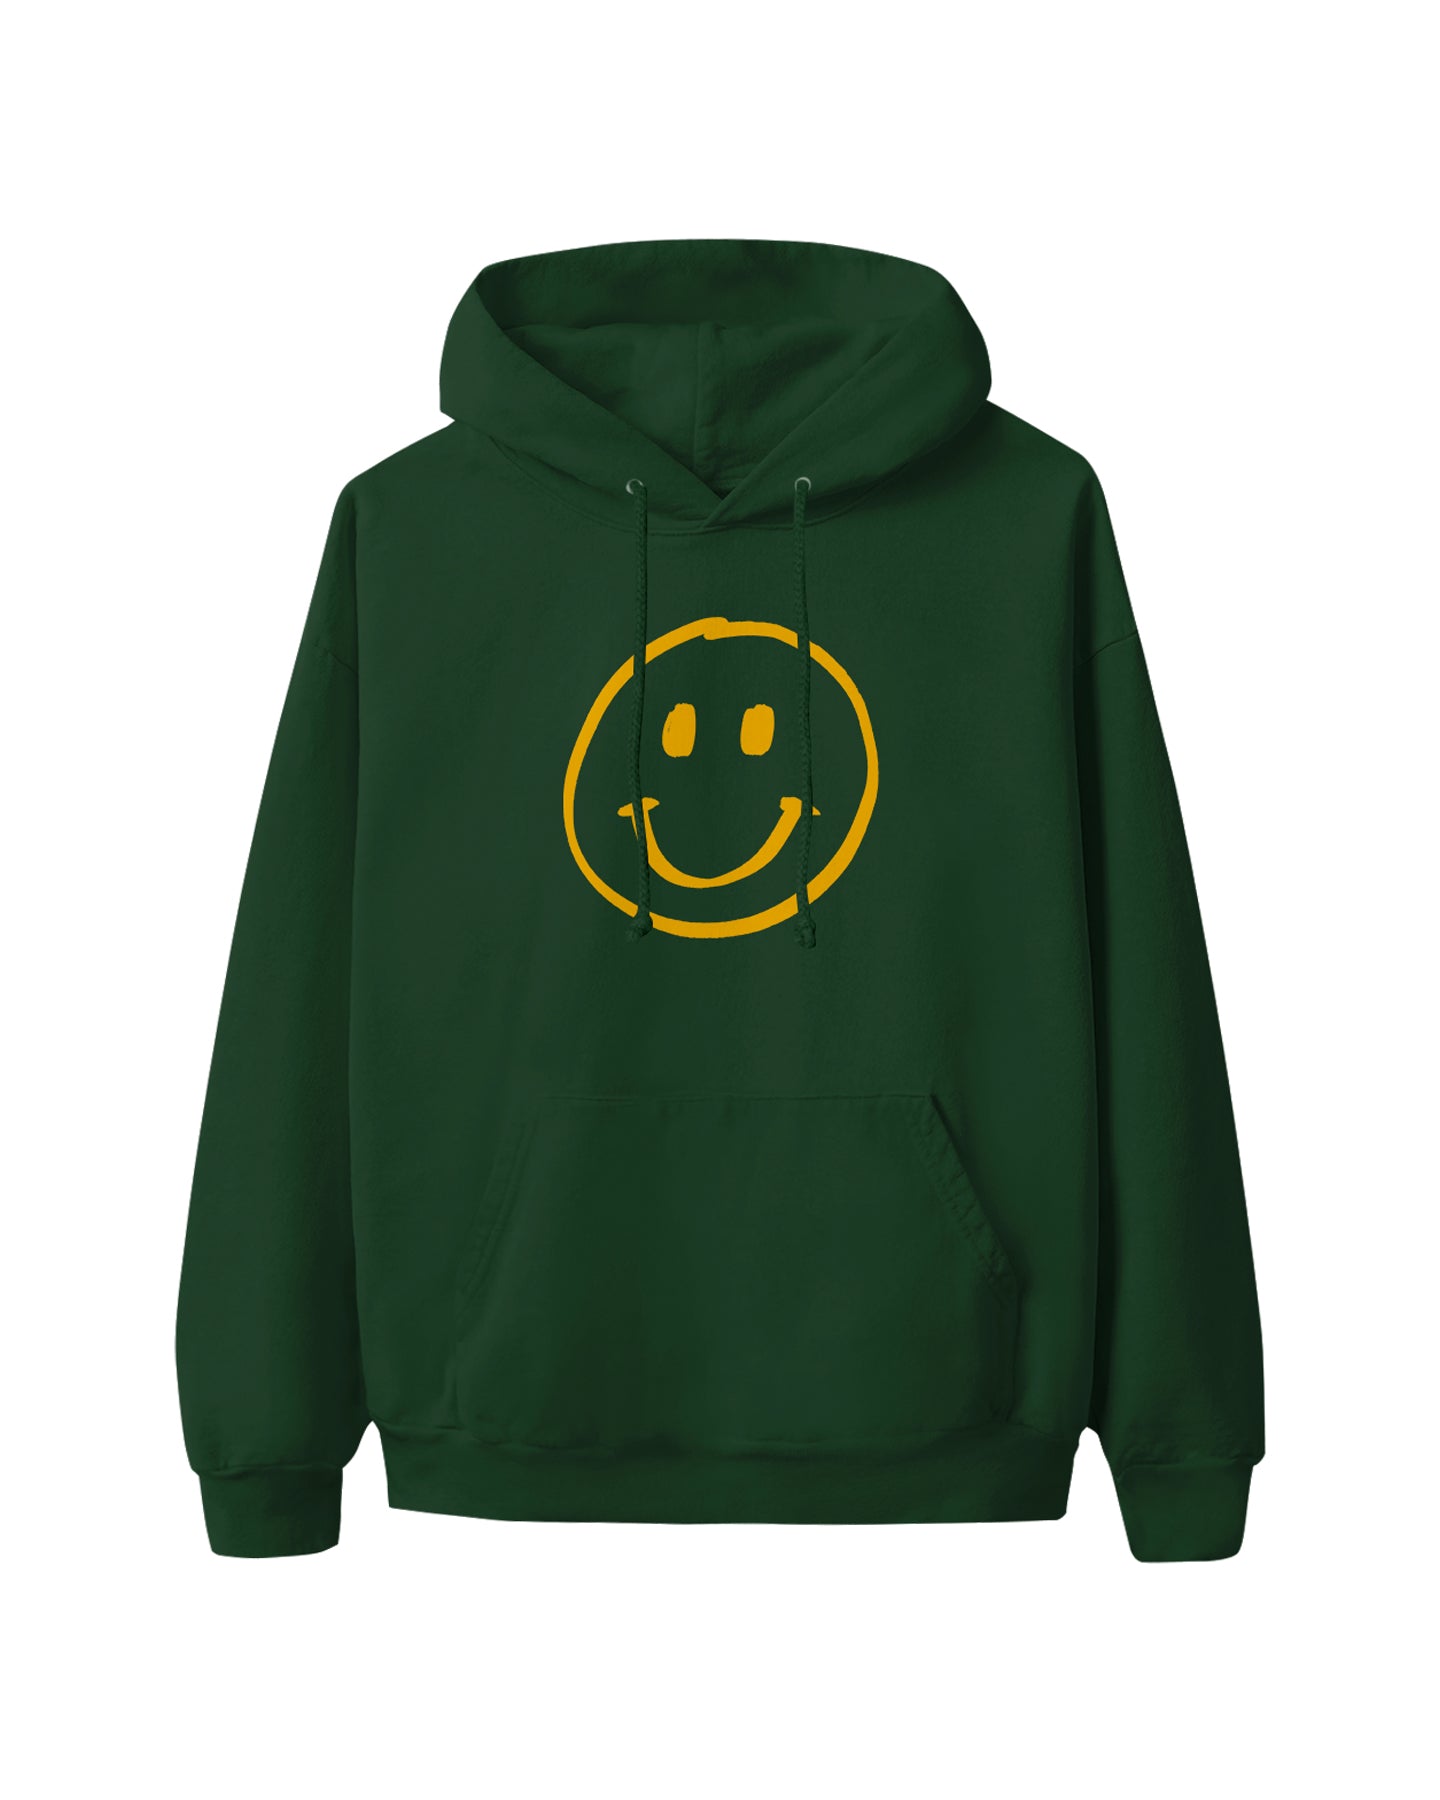 Be Good To Yourself Forest Green Hoodie